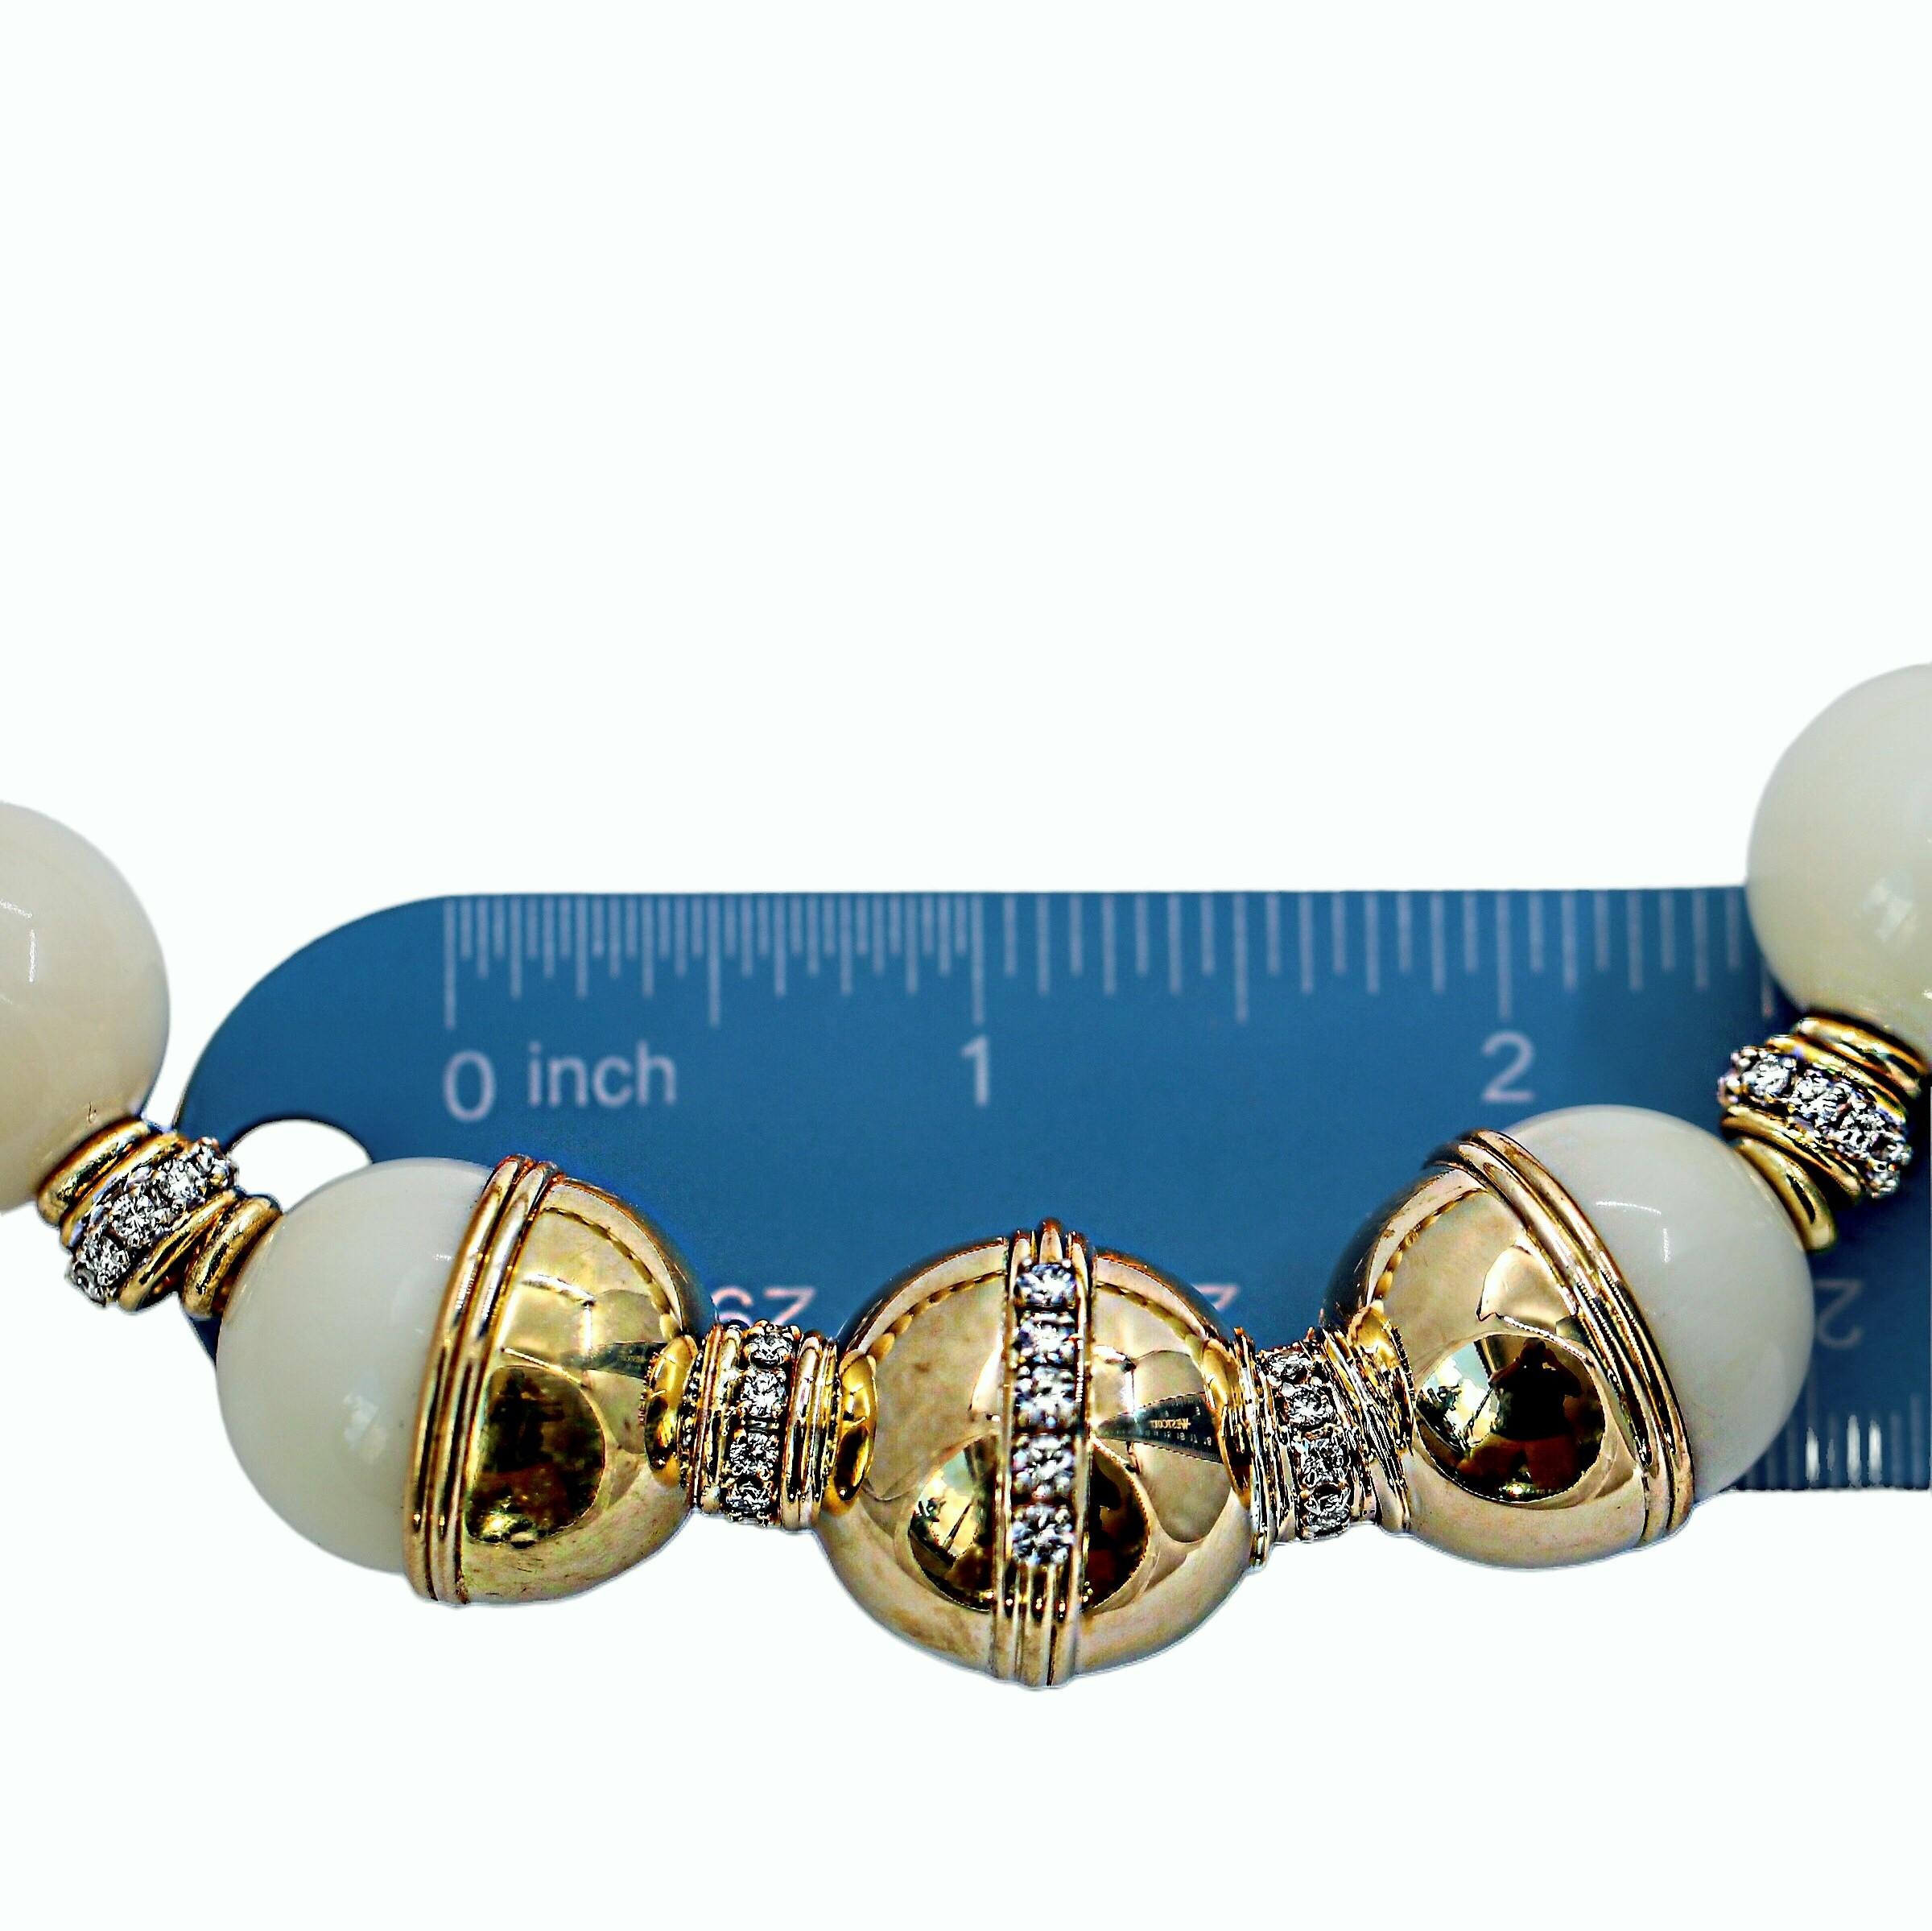 Brilliant Cut Bold, 23mm White Coral Bead, 18K Yellow Gold & Diamond Necklace by Emis Beros